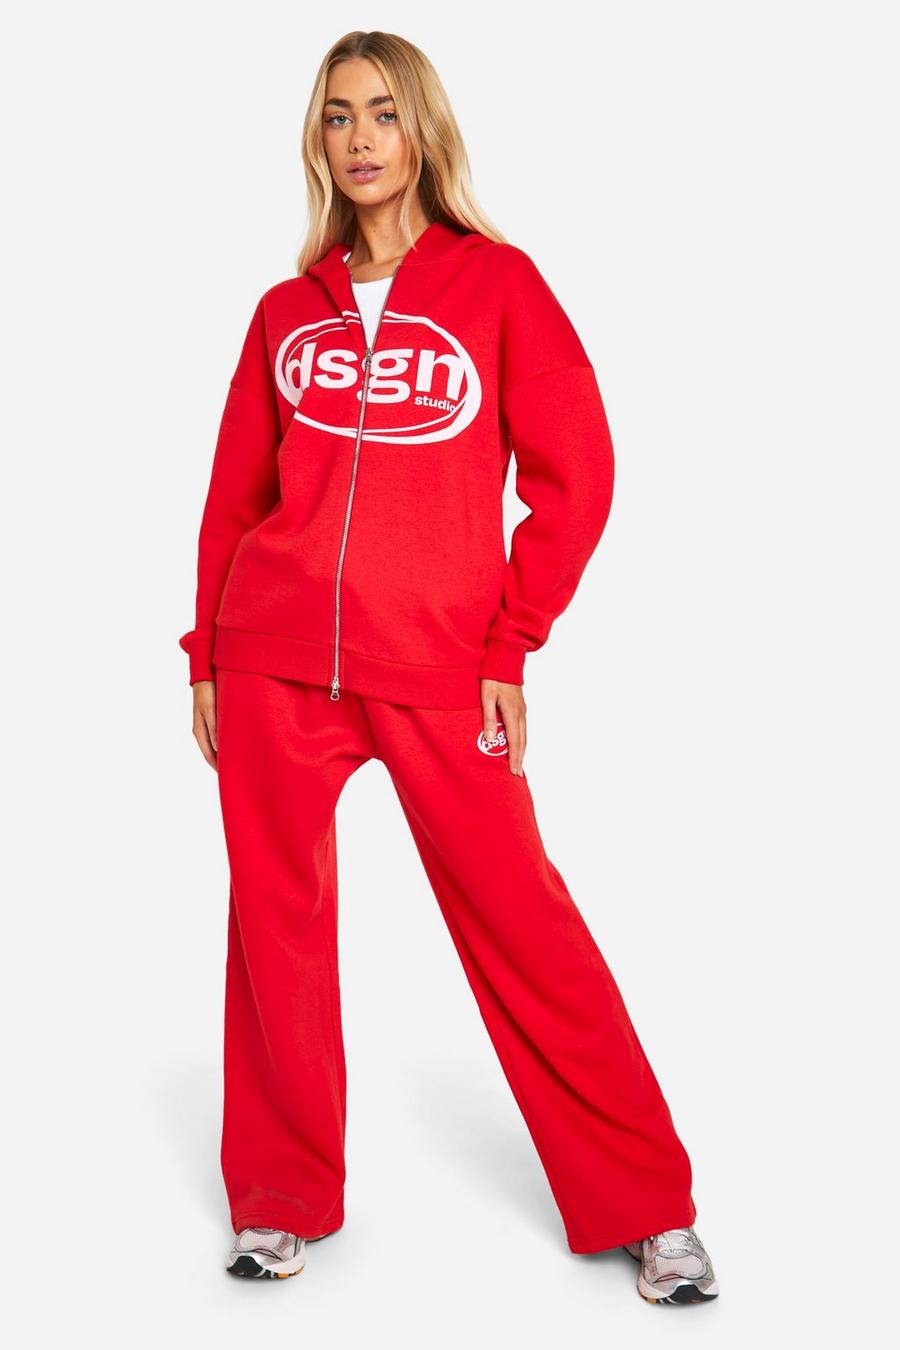 Red Dsgn Studio Oval Print Cuffed Oversized Jogger 